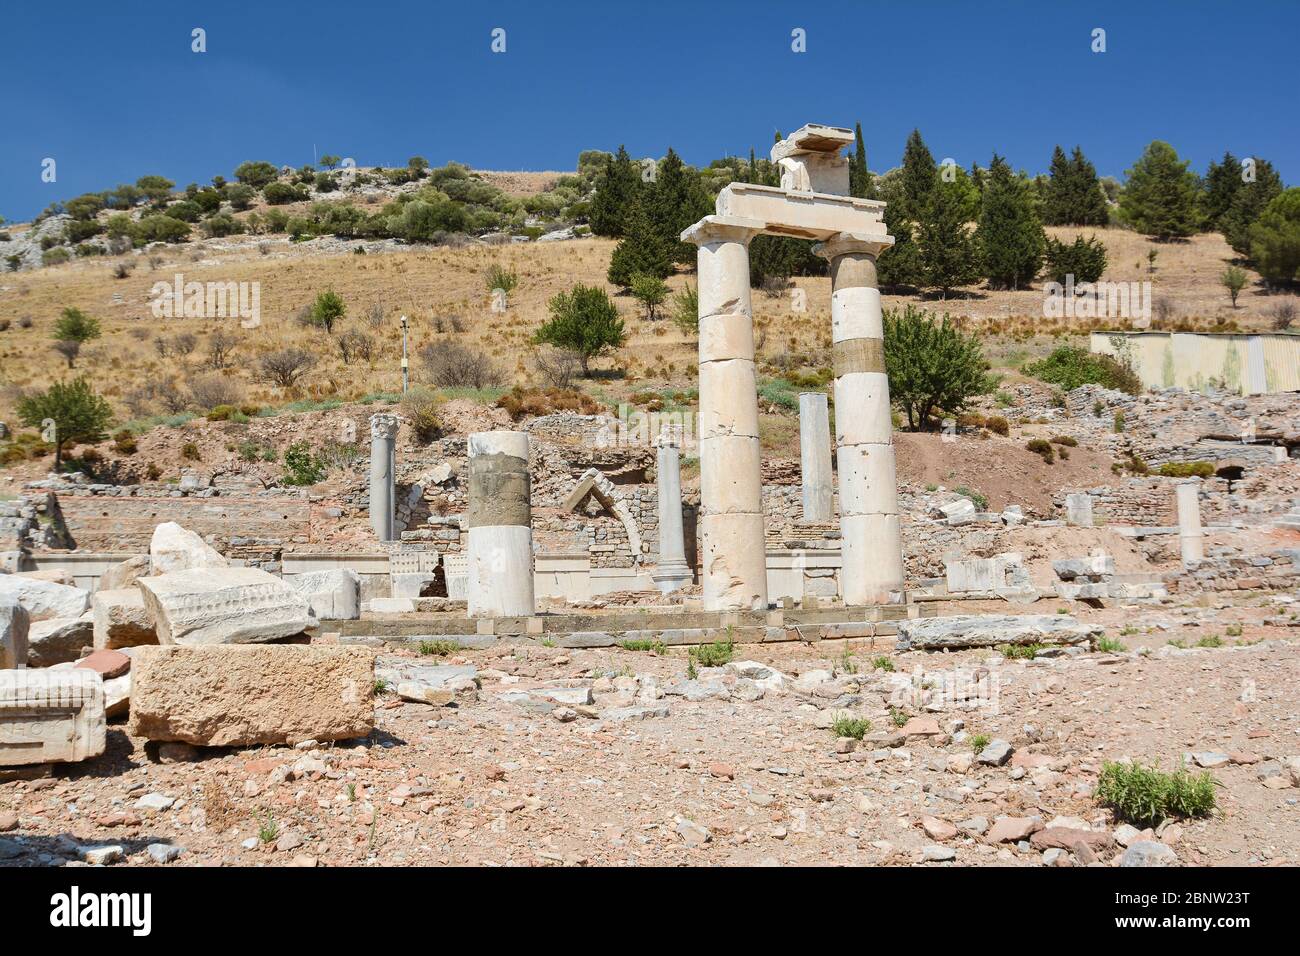 The ruins of the ancient city of Ephesus in Turkey. Prytaneion. Stock Photo